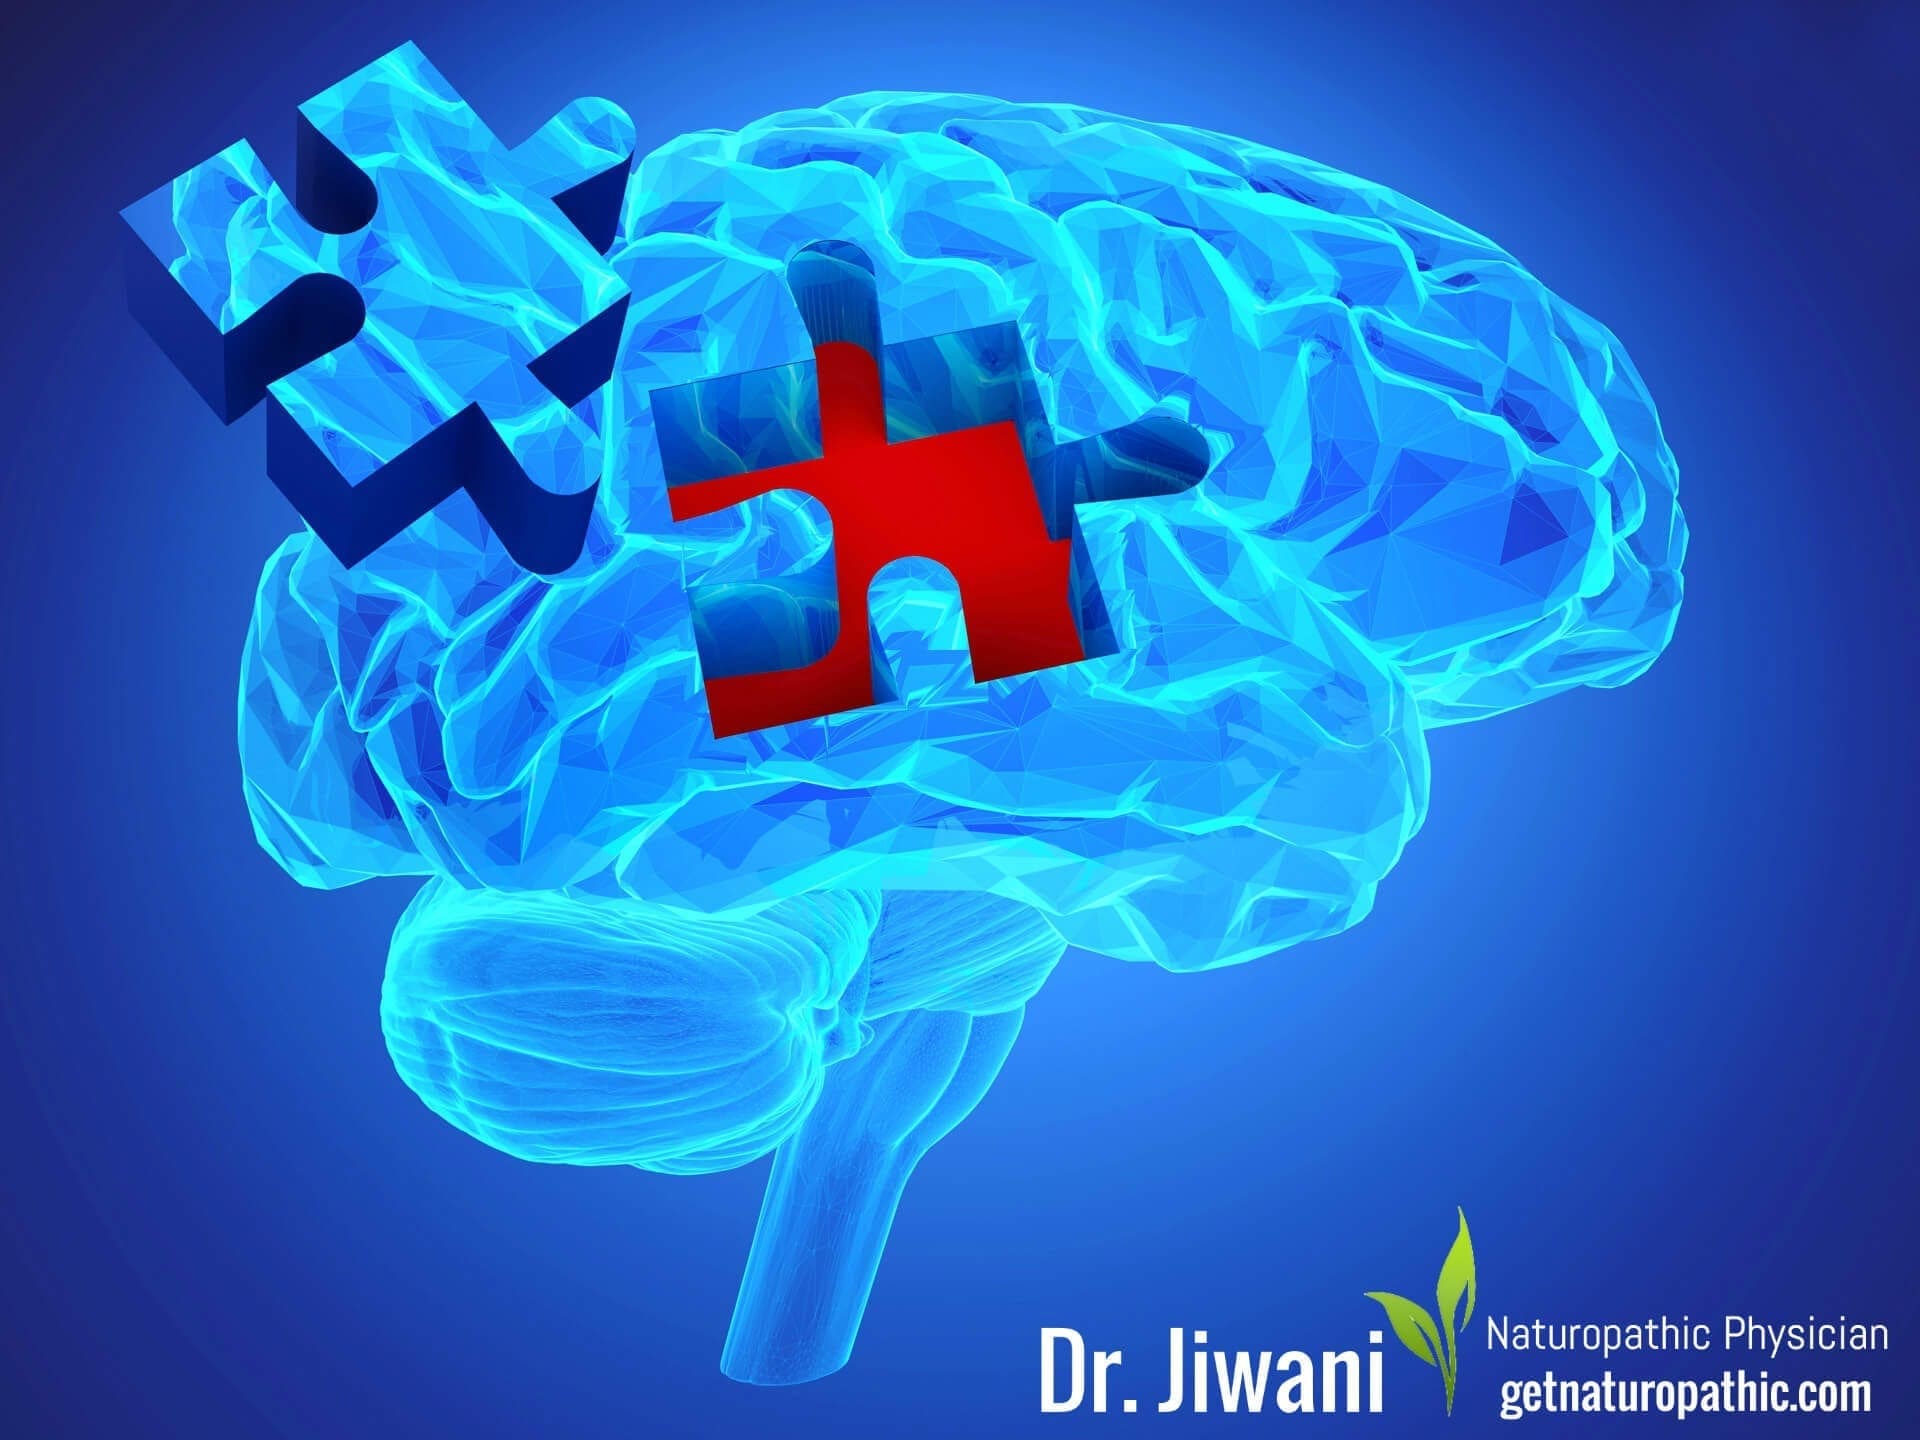 Alzheimer's Sugar the Sweet Poison: The Alarming Ways Sugar Damages Your Body & Brain | Dr. Jiwani's Naturopathic Nuggets Blog